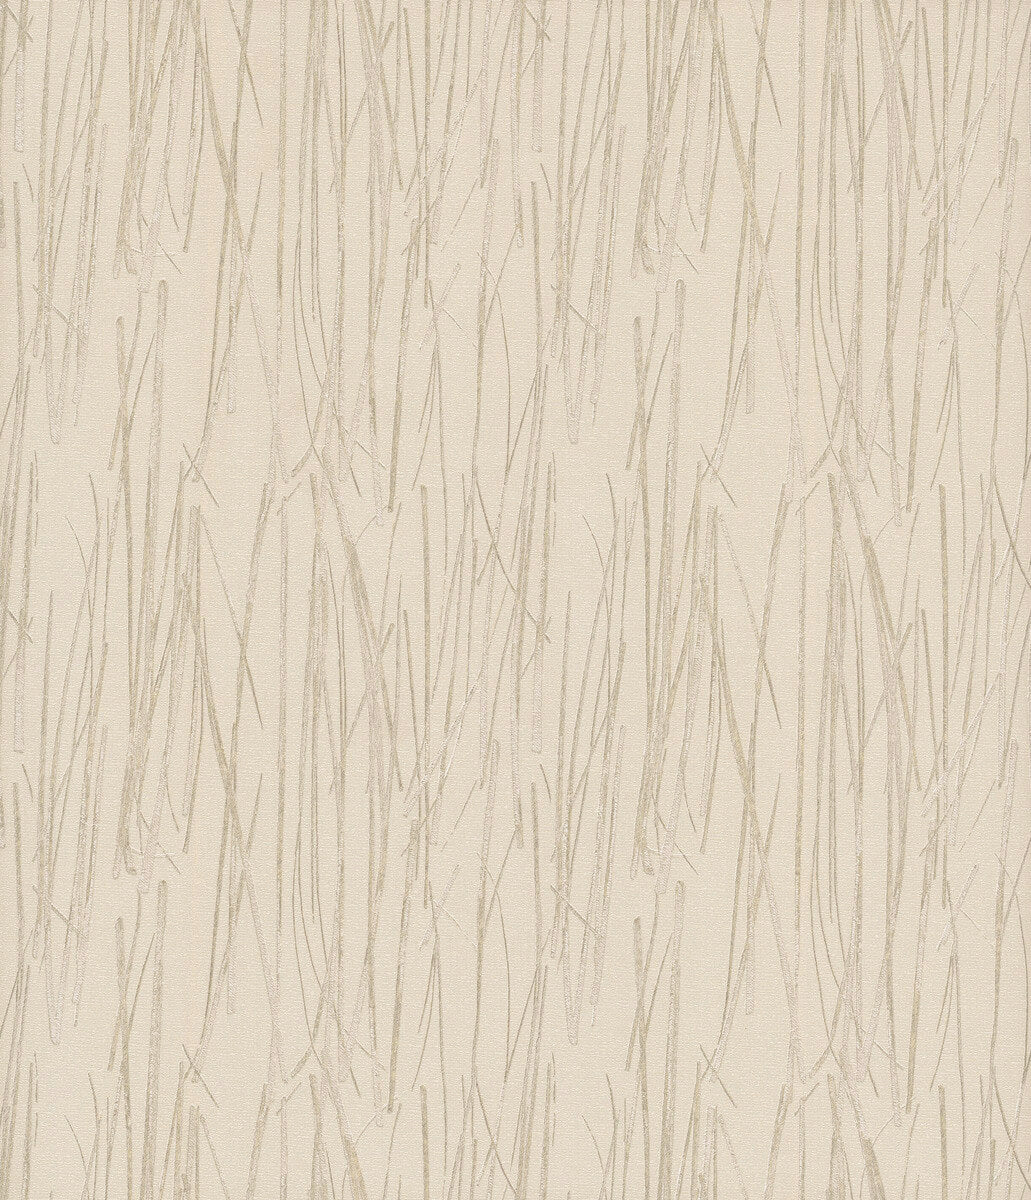 Signature Textures Second Edition Piedmont Bamboo Wallpaper - Ivory